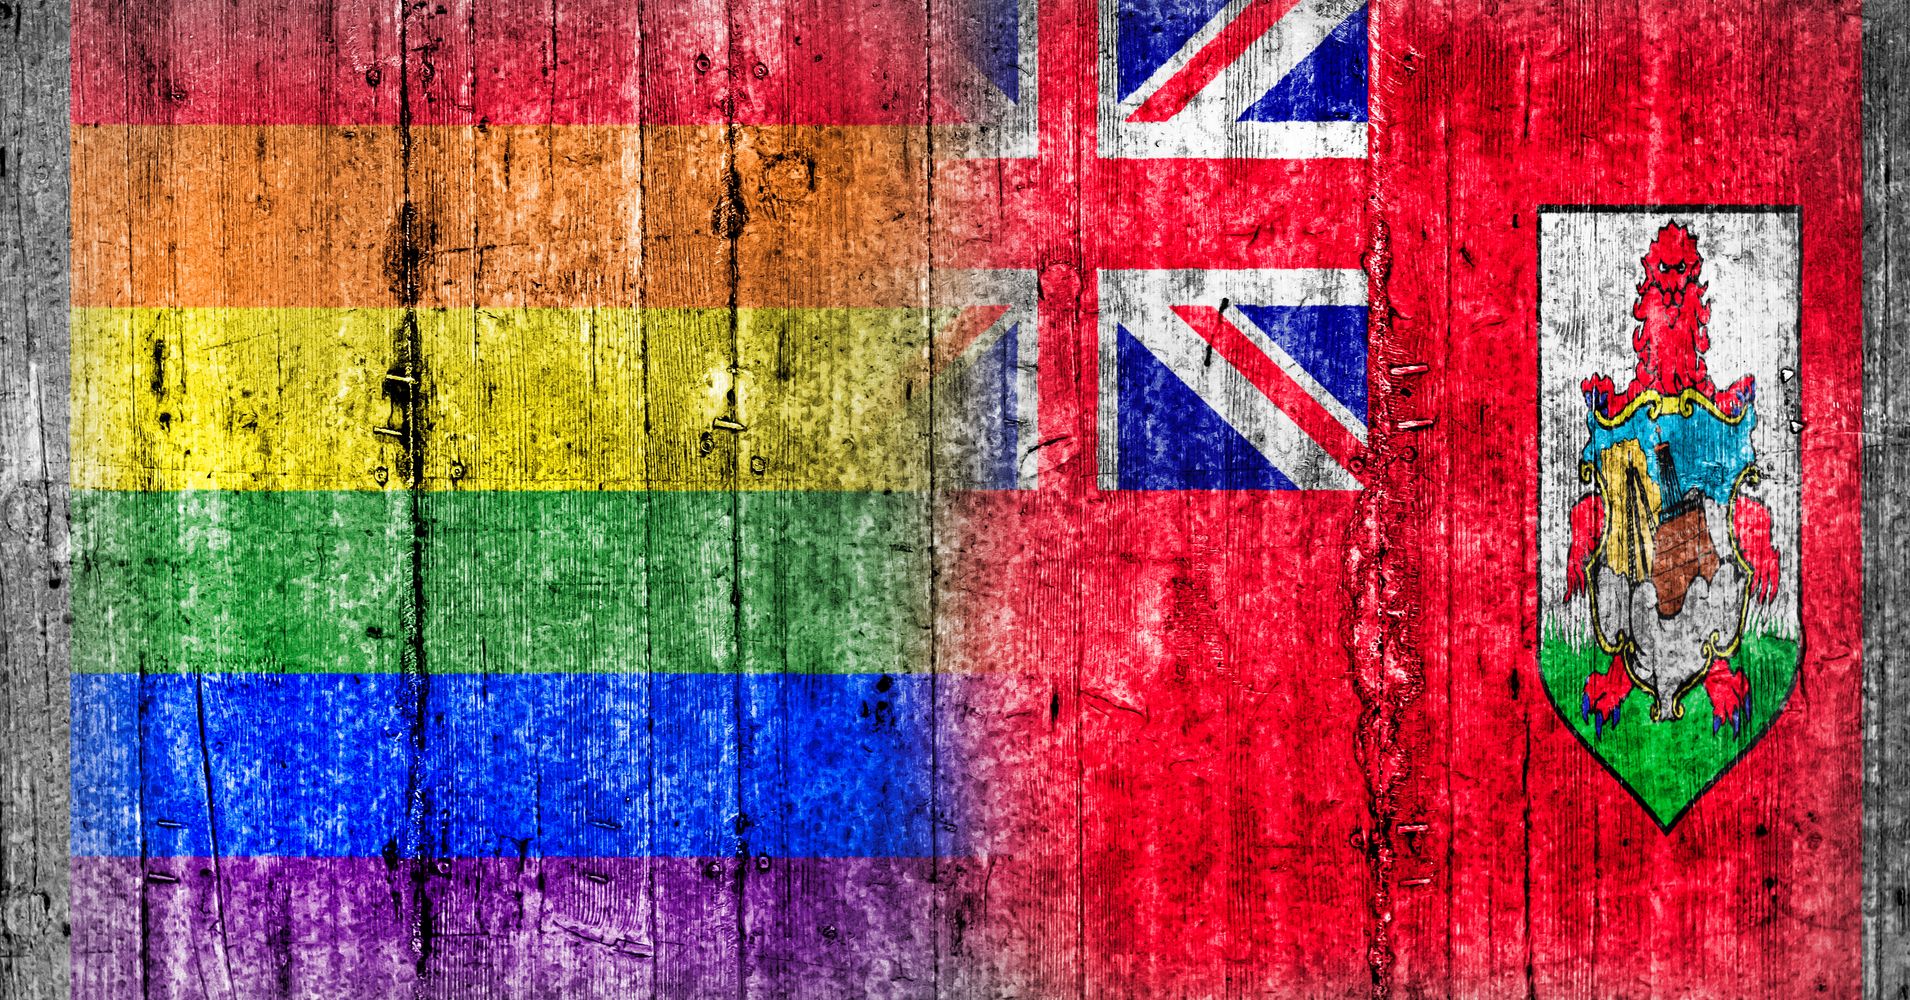 Bermuda Just Overturned Marriage Equality. Will Other Nations Follow Suit?